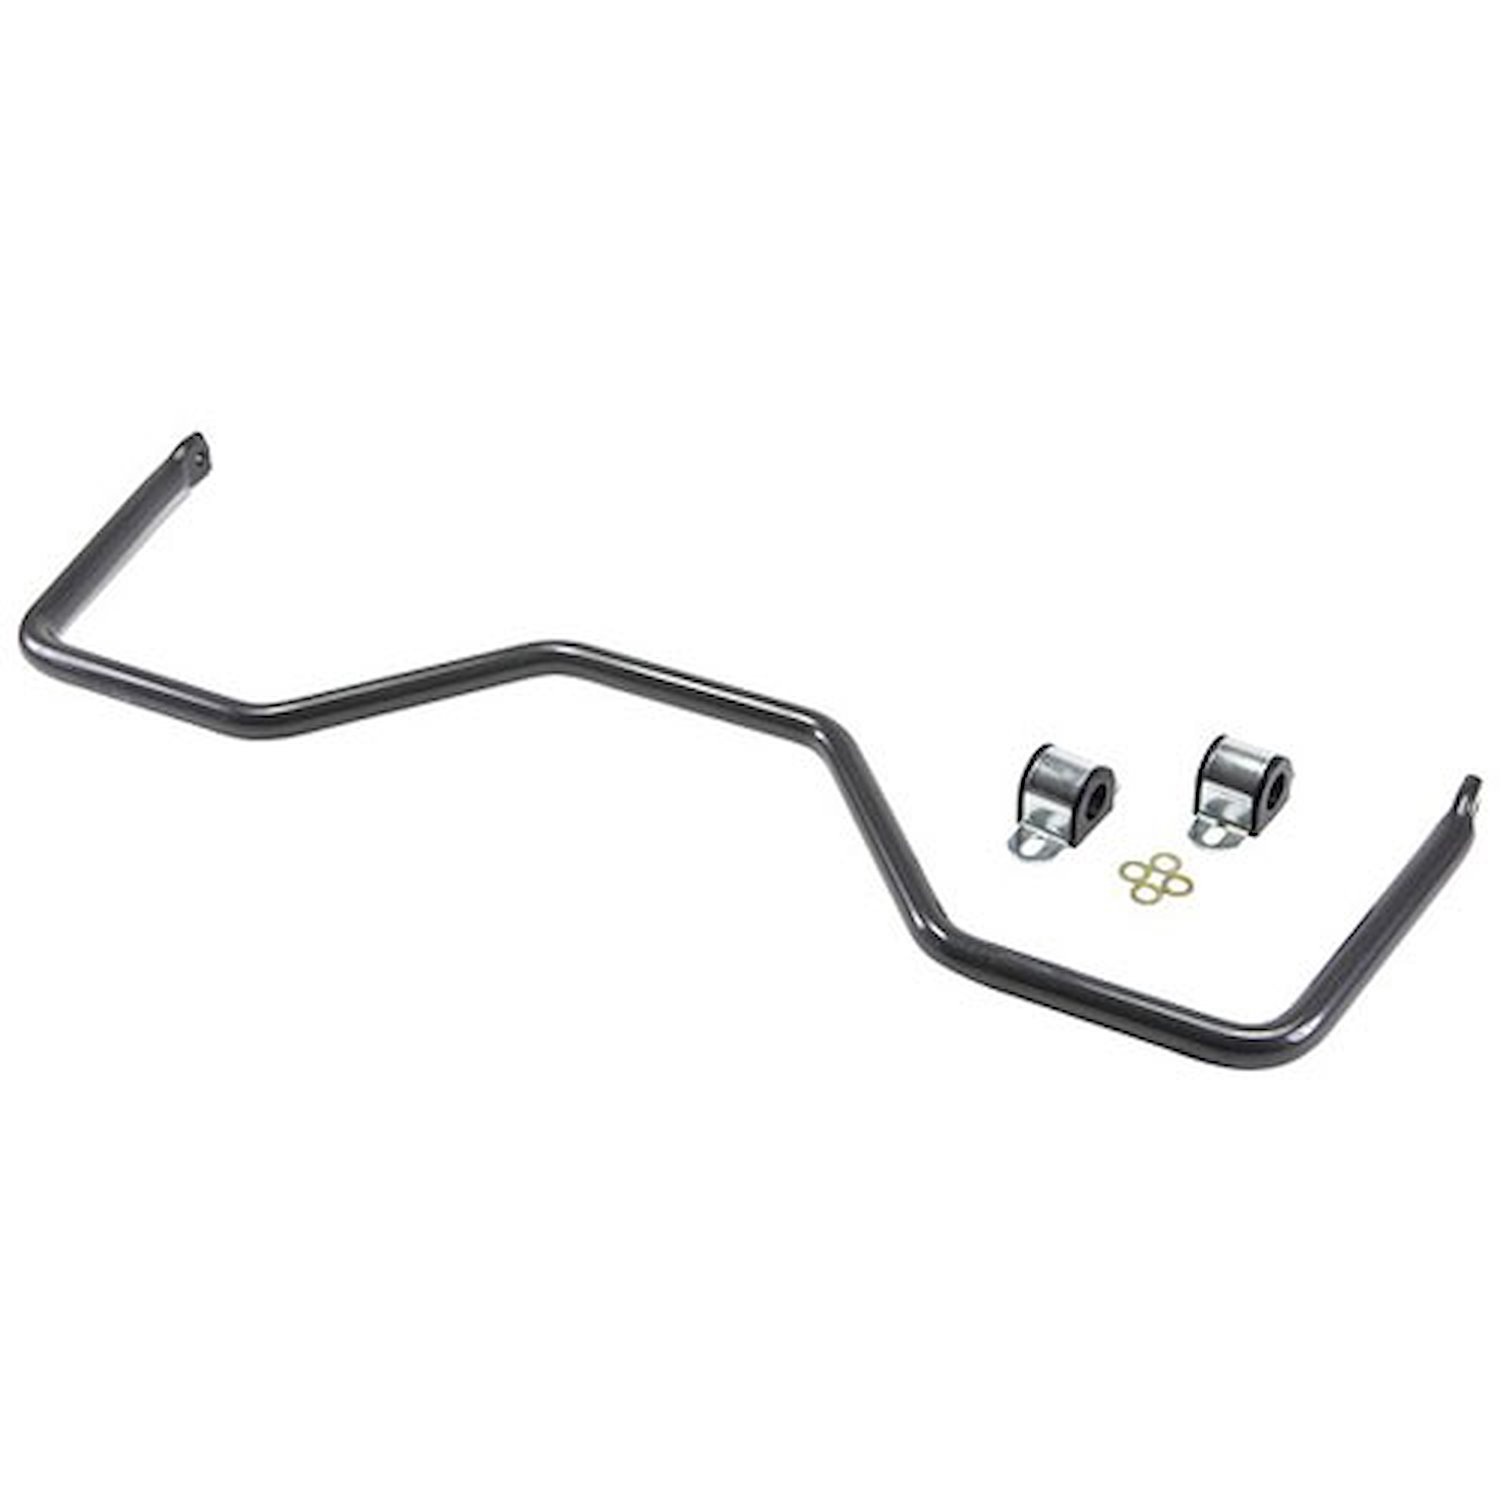 Rear Sway Bar Kit for 2000-2015 Chevy